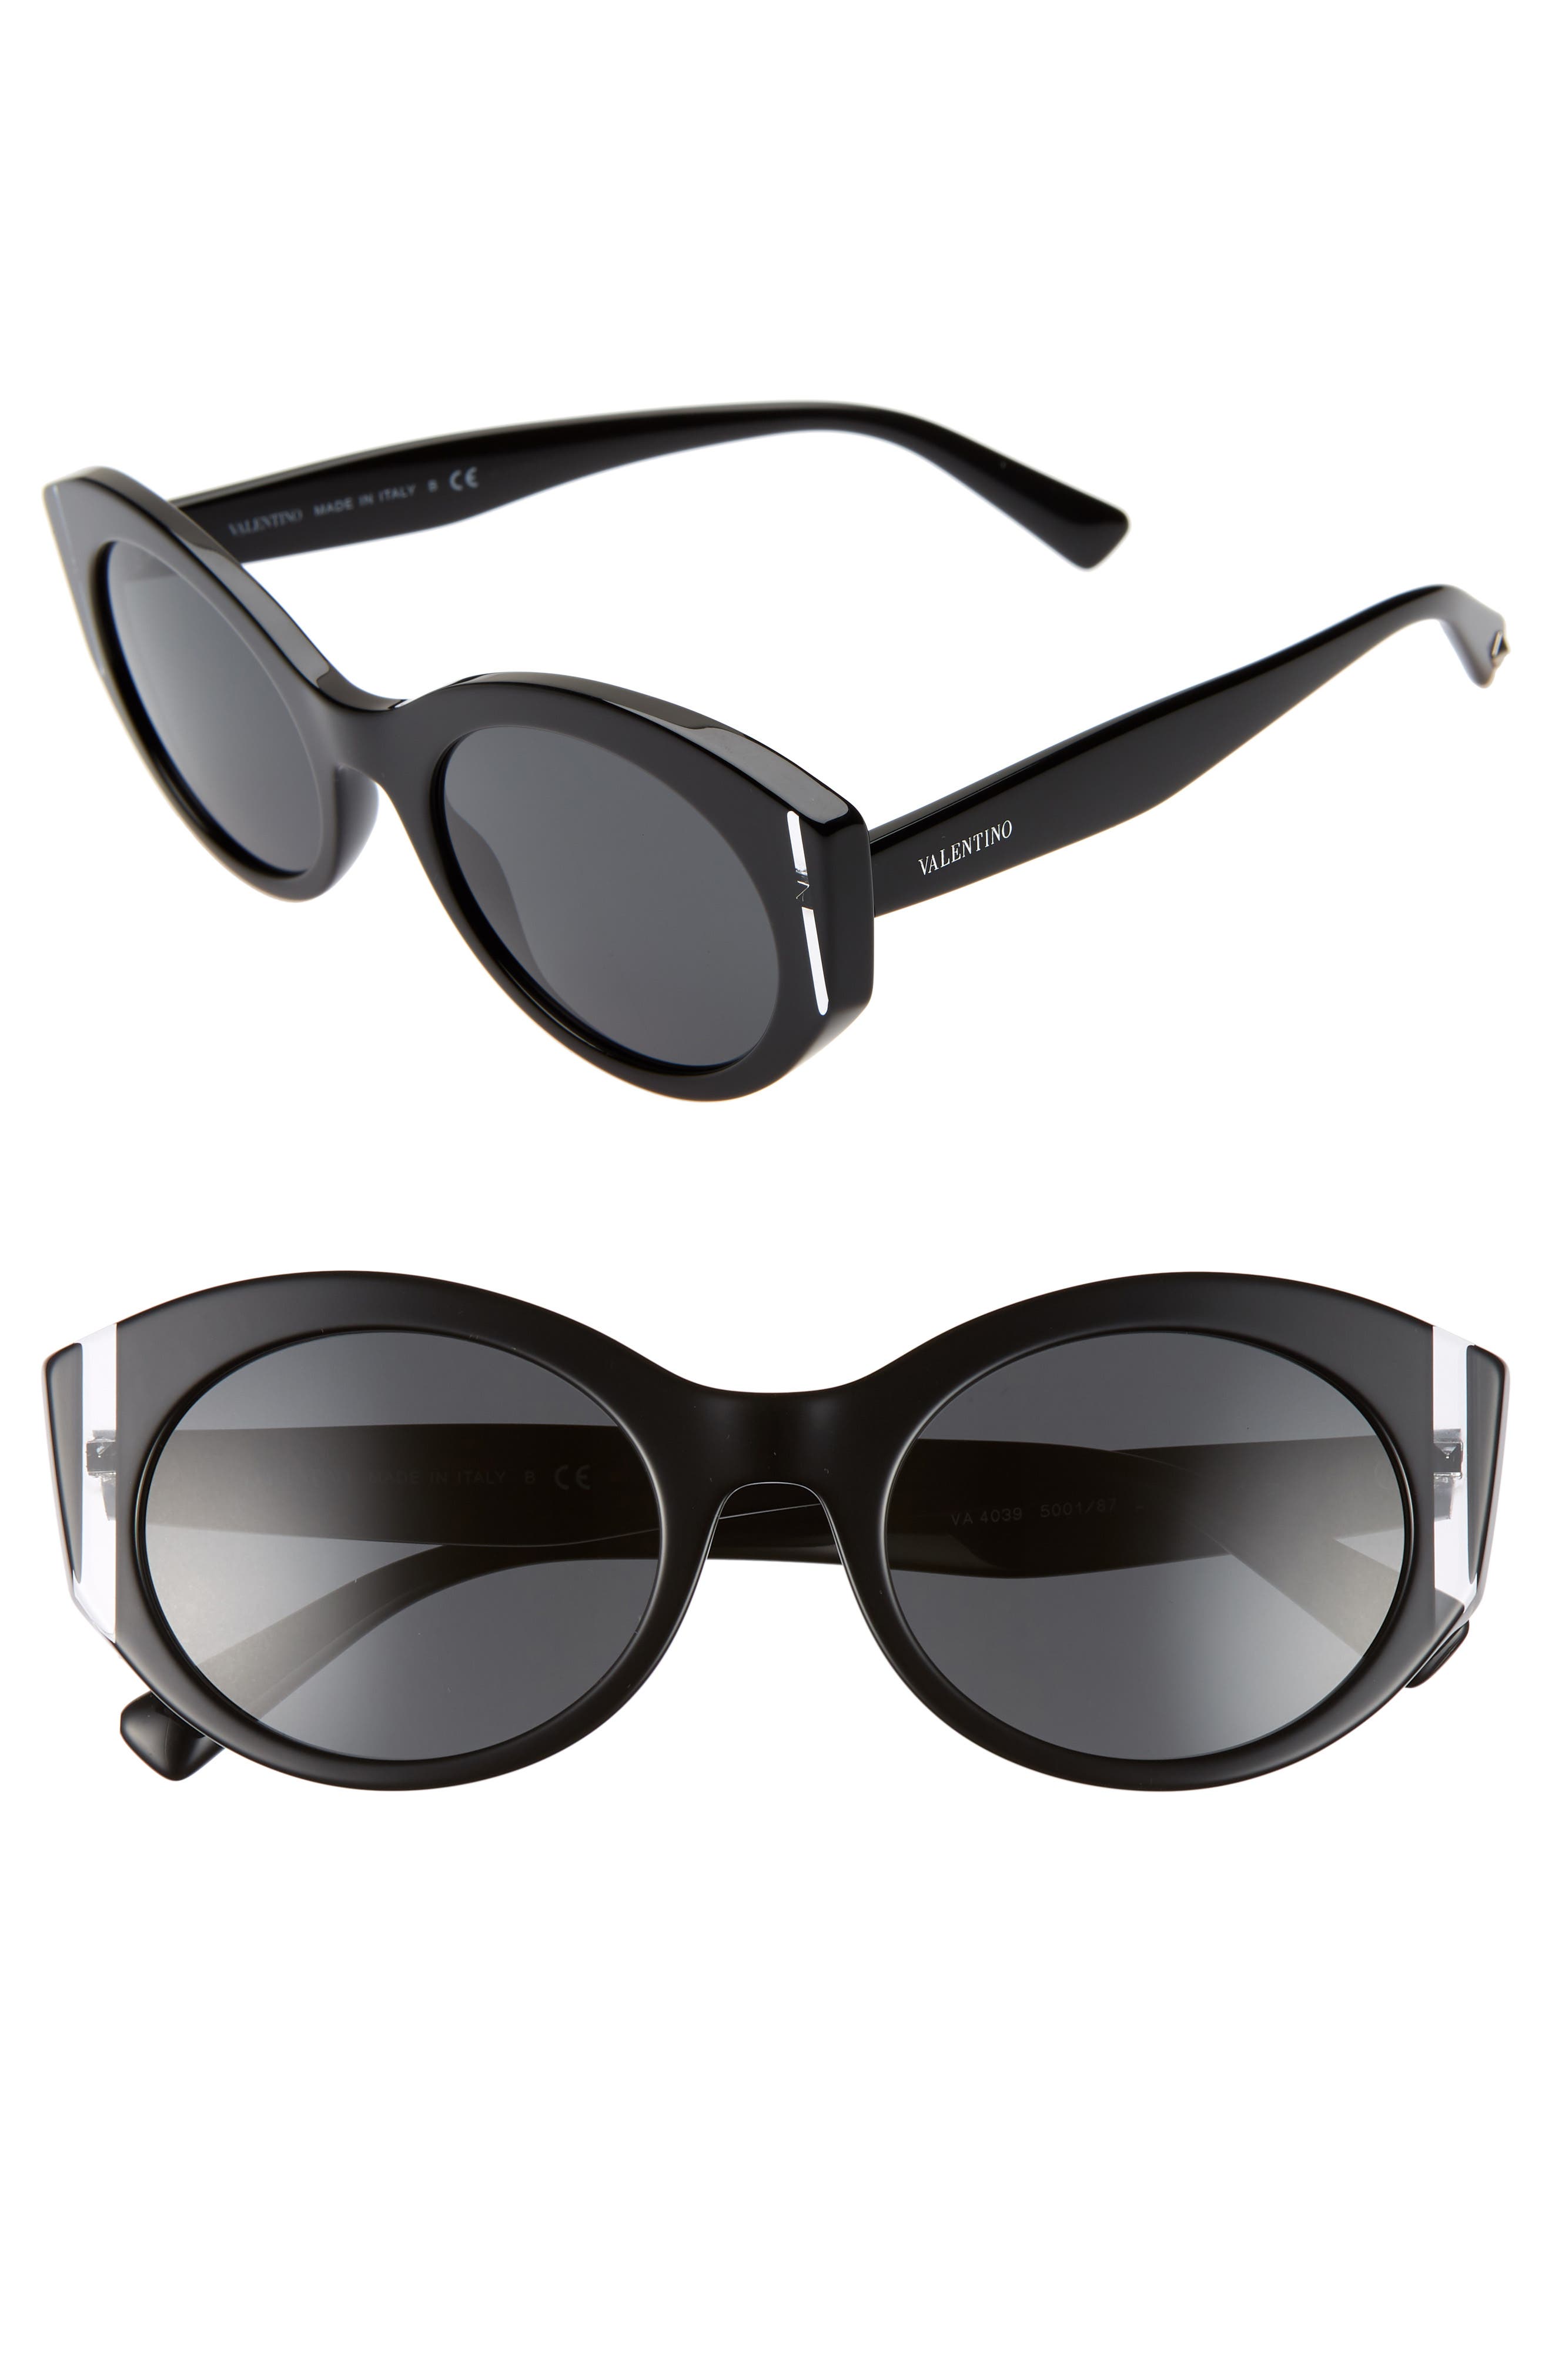 Valentino 53mm Cat Eye Sunglasses in Black Crystal Solid at Nordstrom